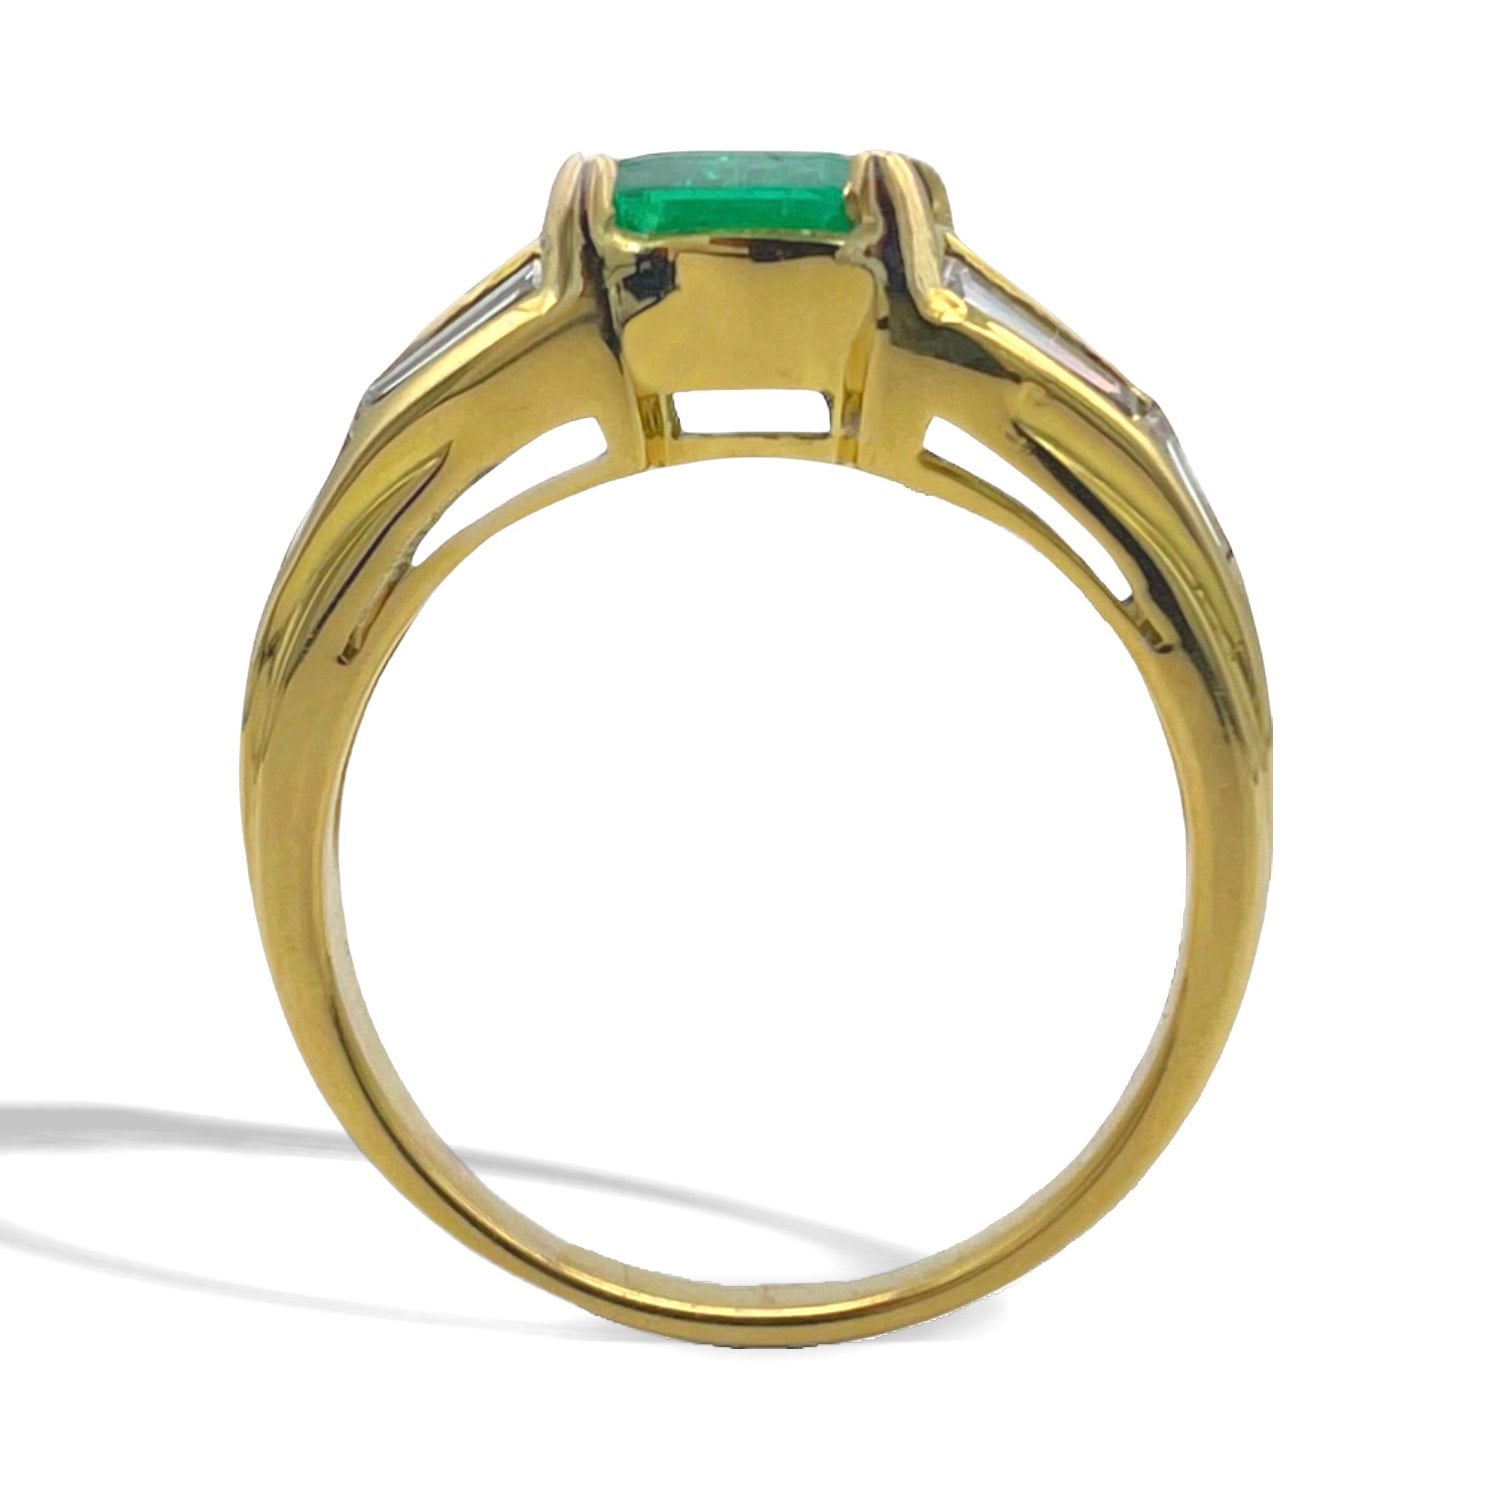 Buy SIDHARTH GEMS 8.50 Carat Natural Emerald Ring (Natural Panna/Panna stone  Gold Ring) Original AAA Quality Gemstone Adjustable Ring Astrological  Purpose For Men Women By Lab Certified at Amazon.in